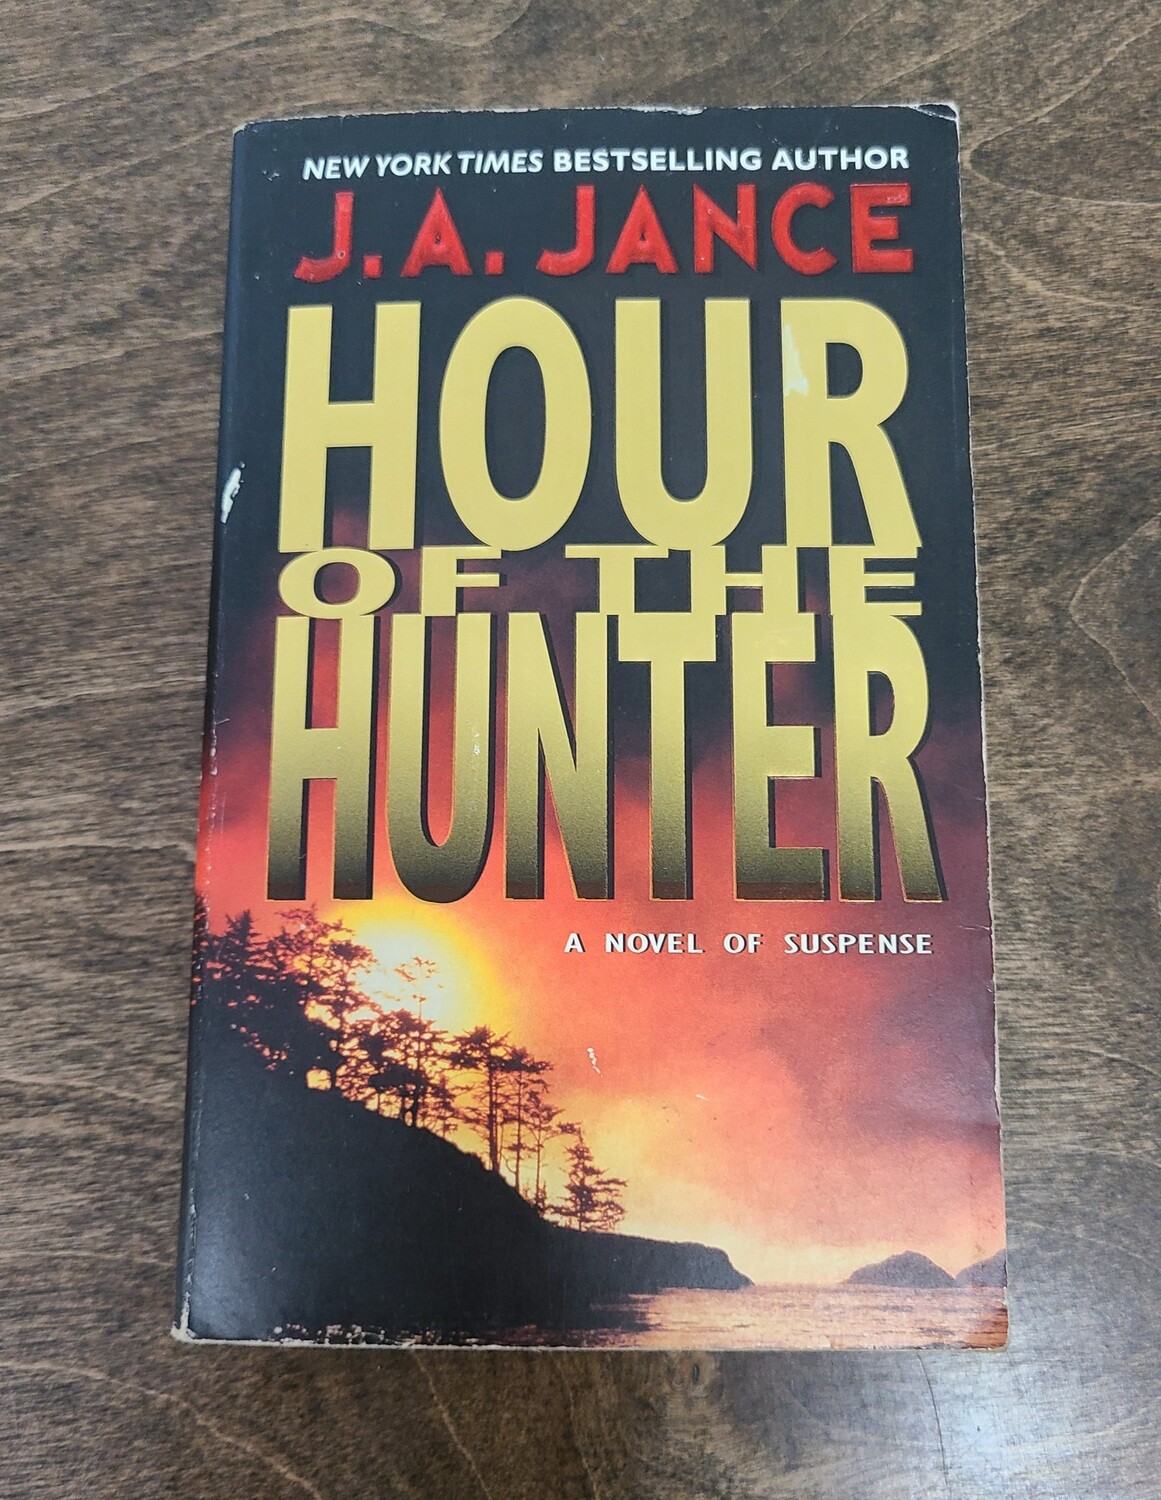 Hour of the Hunter by J.A. Jance